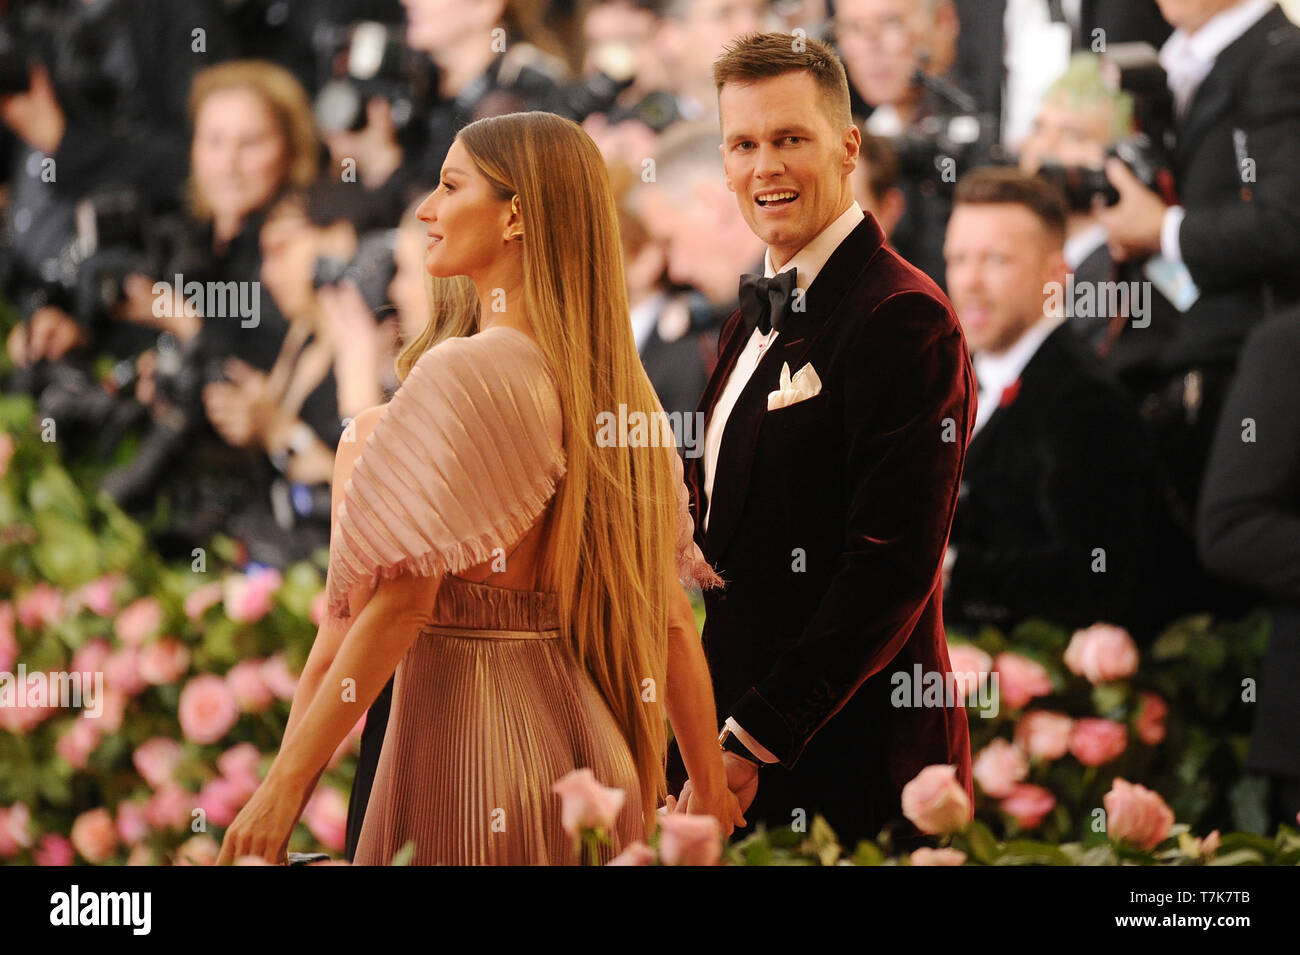 New York Ny Usa 06th May 19 Gisele Bundchen And Tom Brady At The 19 Met